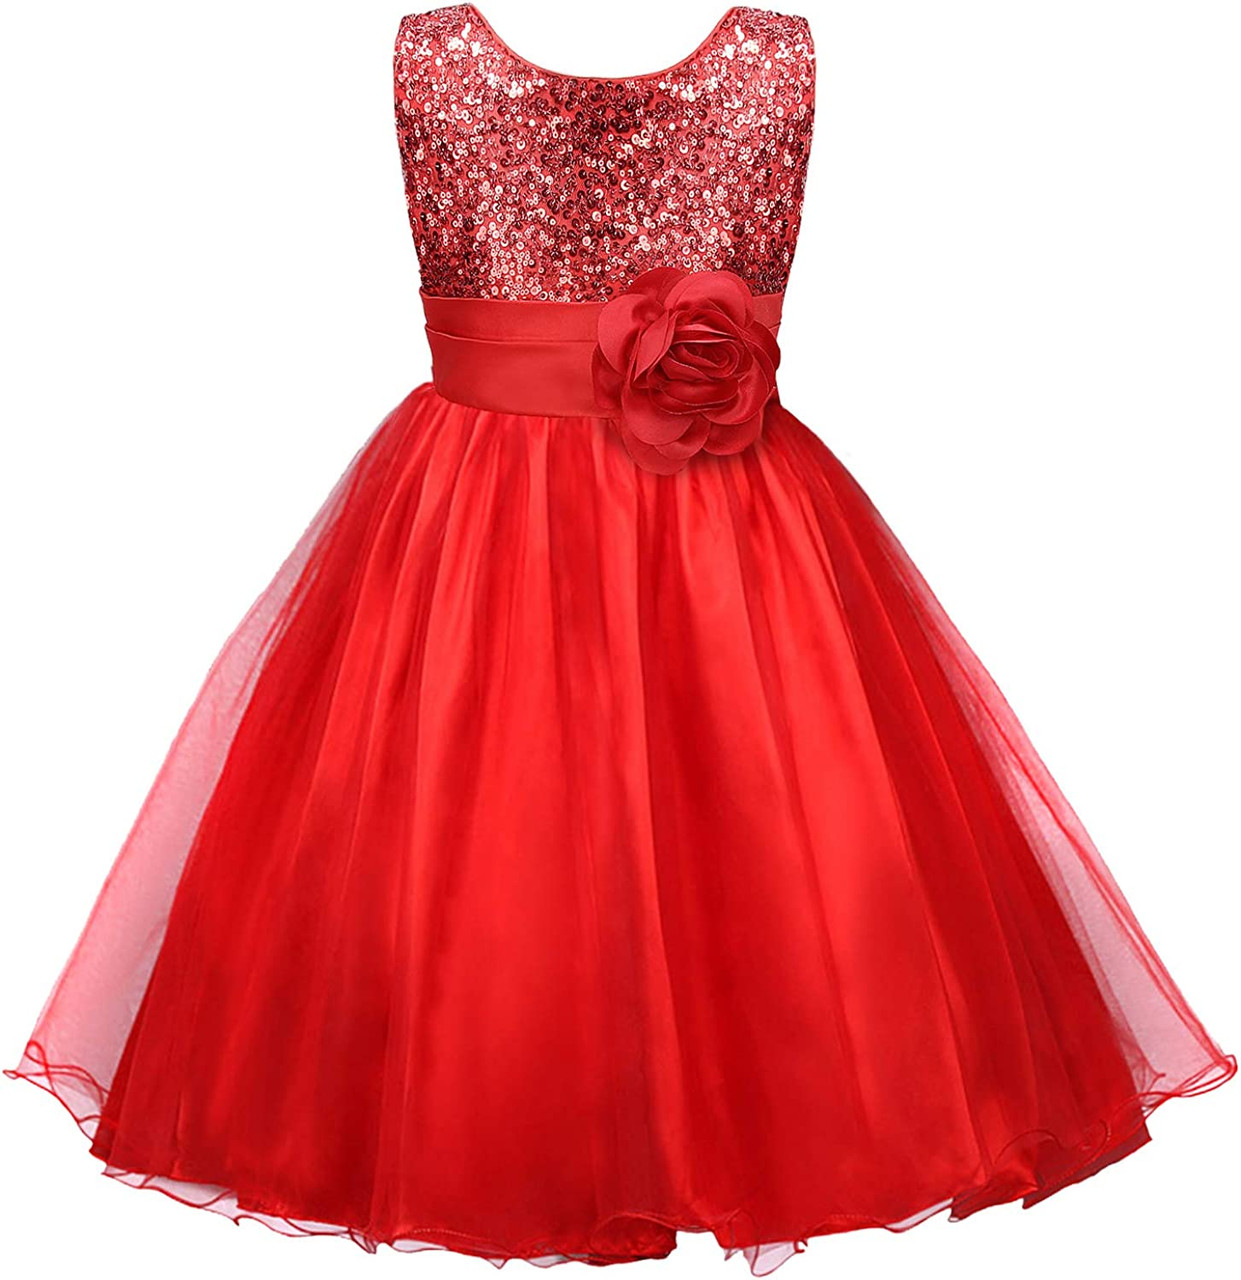 Red Sequined Bodice w/ Double Layered Mesh Dress - Pink Princess